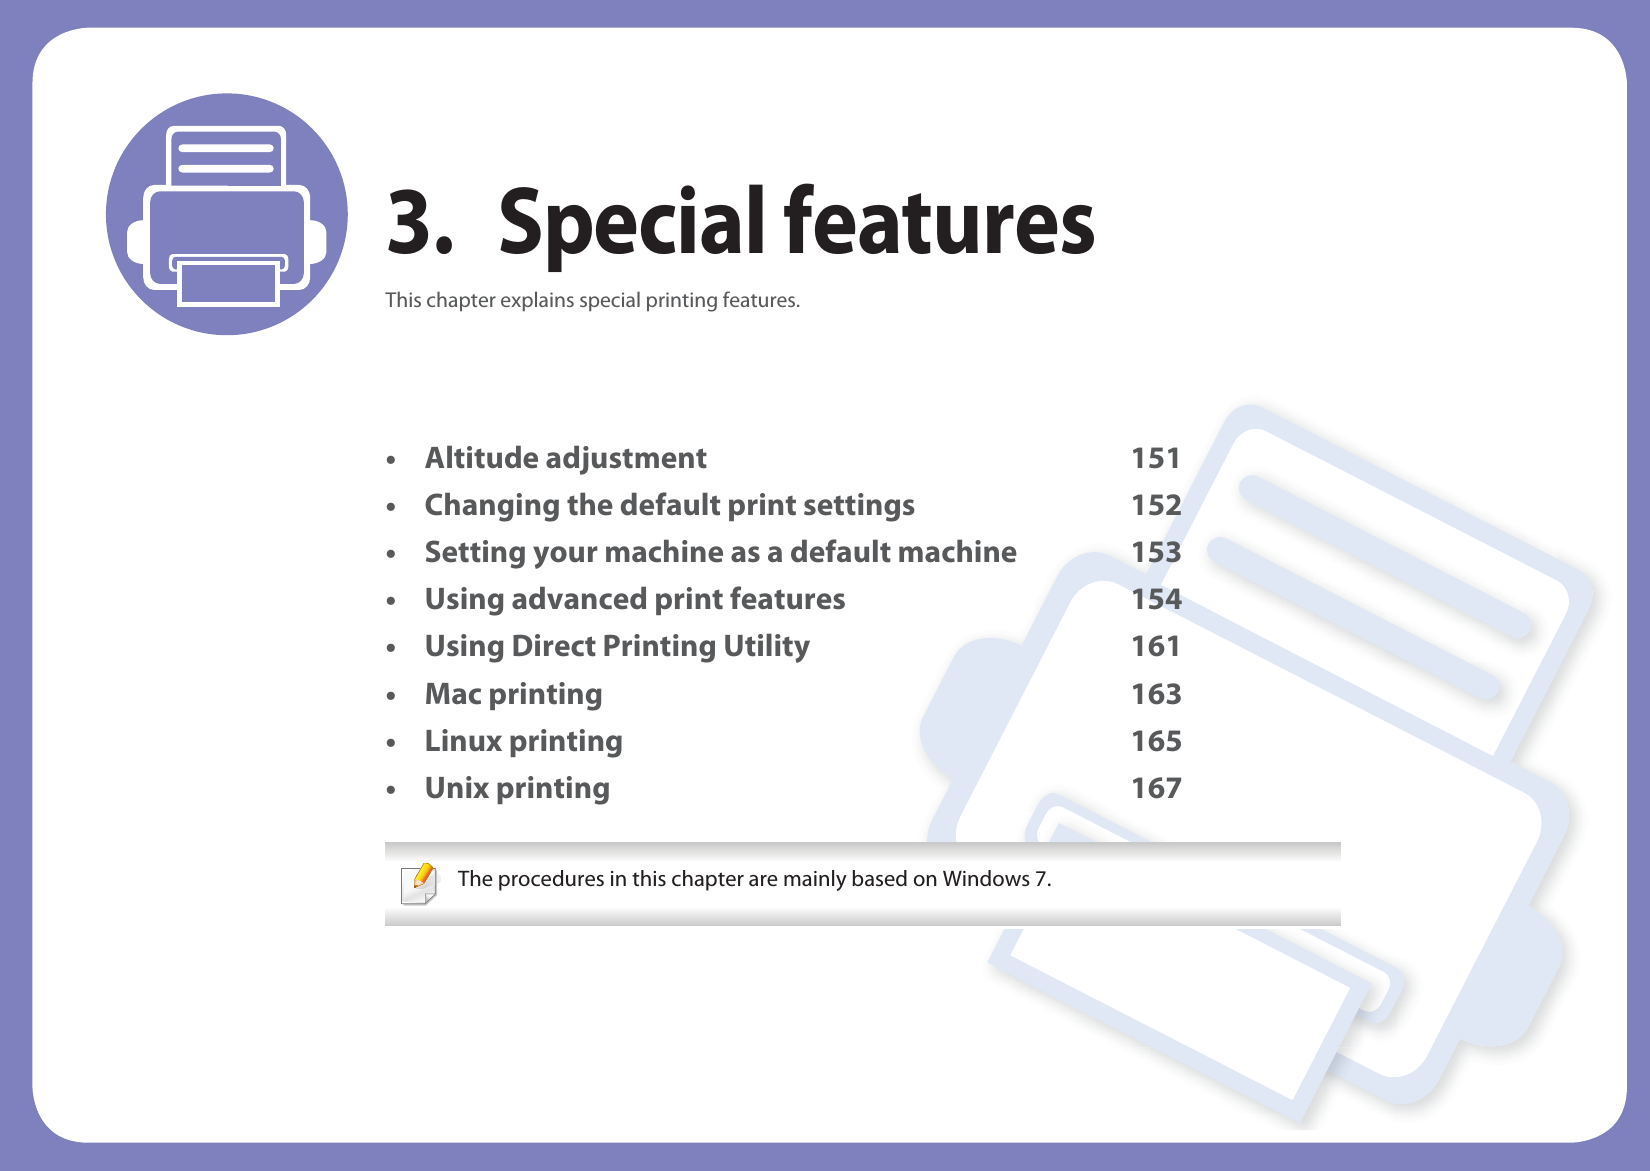 3. Special featuresThis chapter explains special printing features.• Altitude adjustment 151• Changing the default print settings 152• Setting your machine as a default machine 153• Using advanced print features 154• Using Direct Printing Utility 161• Mac printing 163• Linux printing 165• Unix printing 167 The procedures in this chapter are mainly based on Windows 7. 